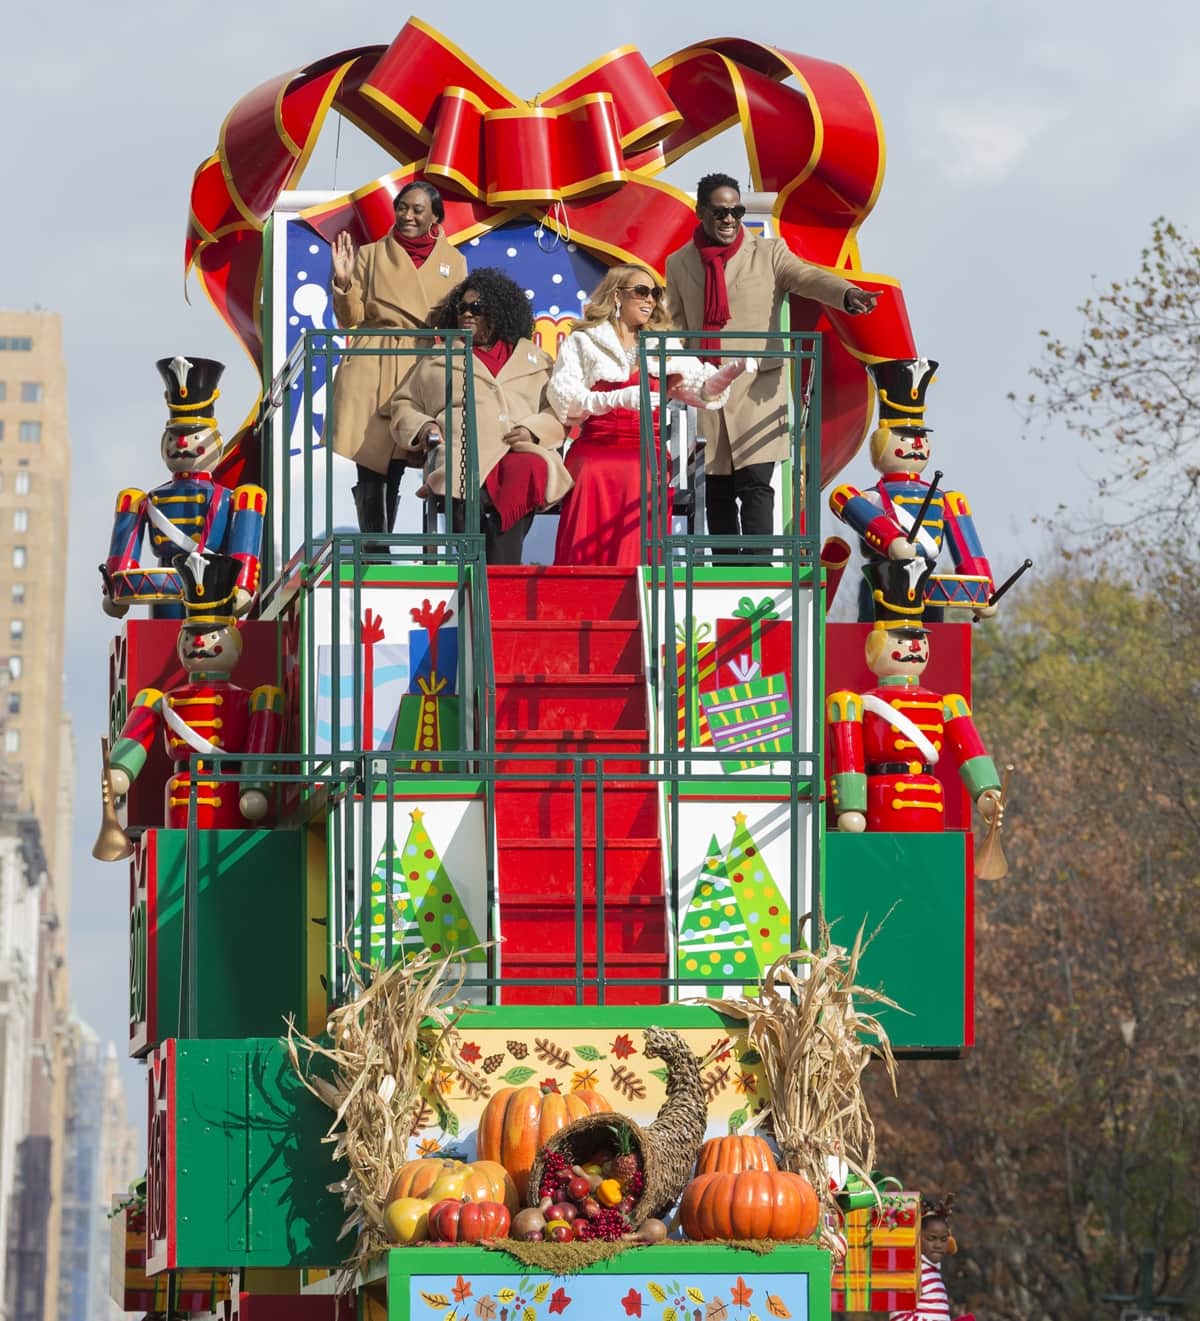 Mariah Carey attends the 2015 Macy's Thanksgiving Day Parade on Central Park West